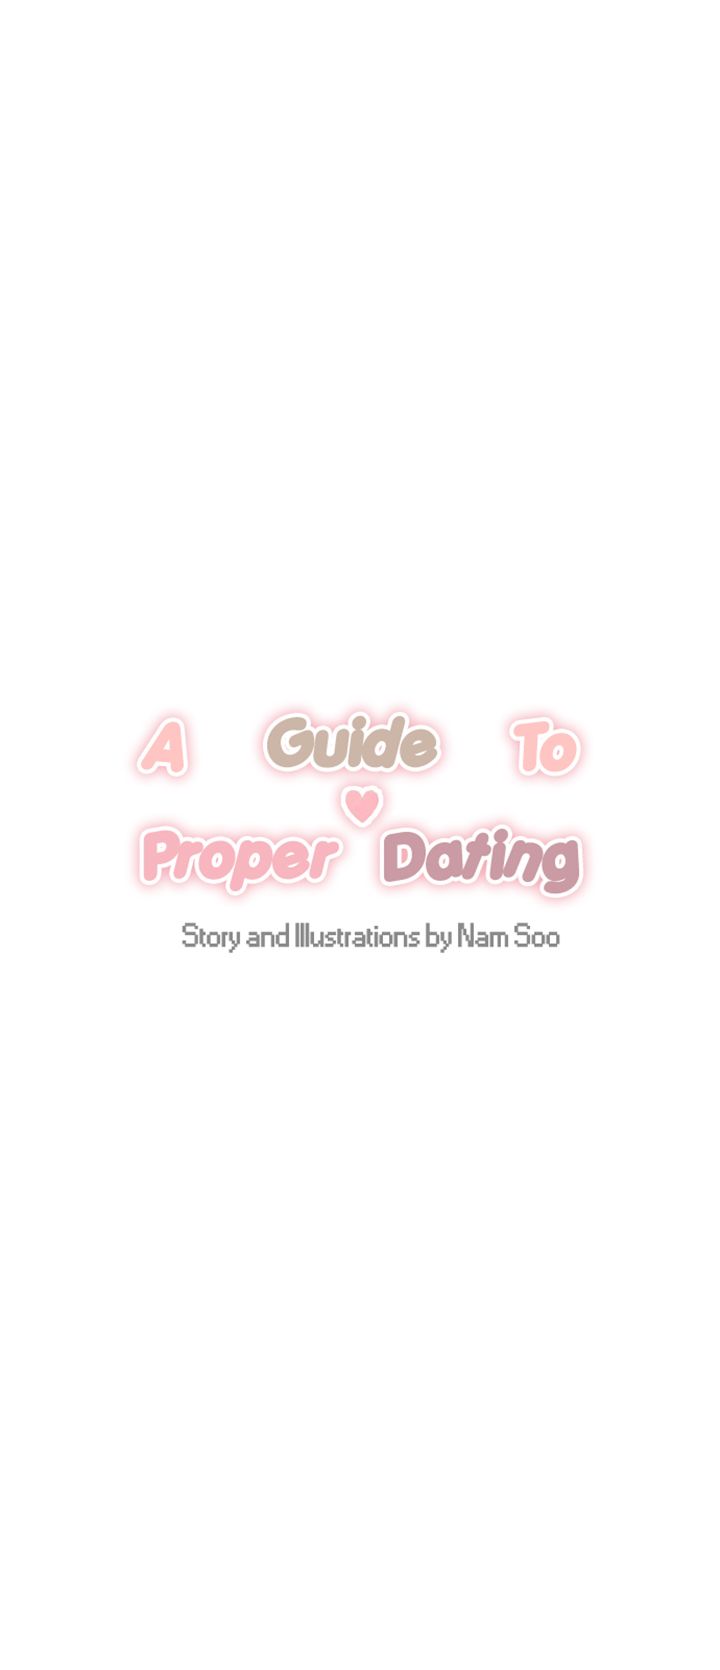 A Guide To Proper Dating 30 1